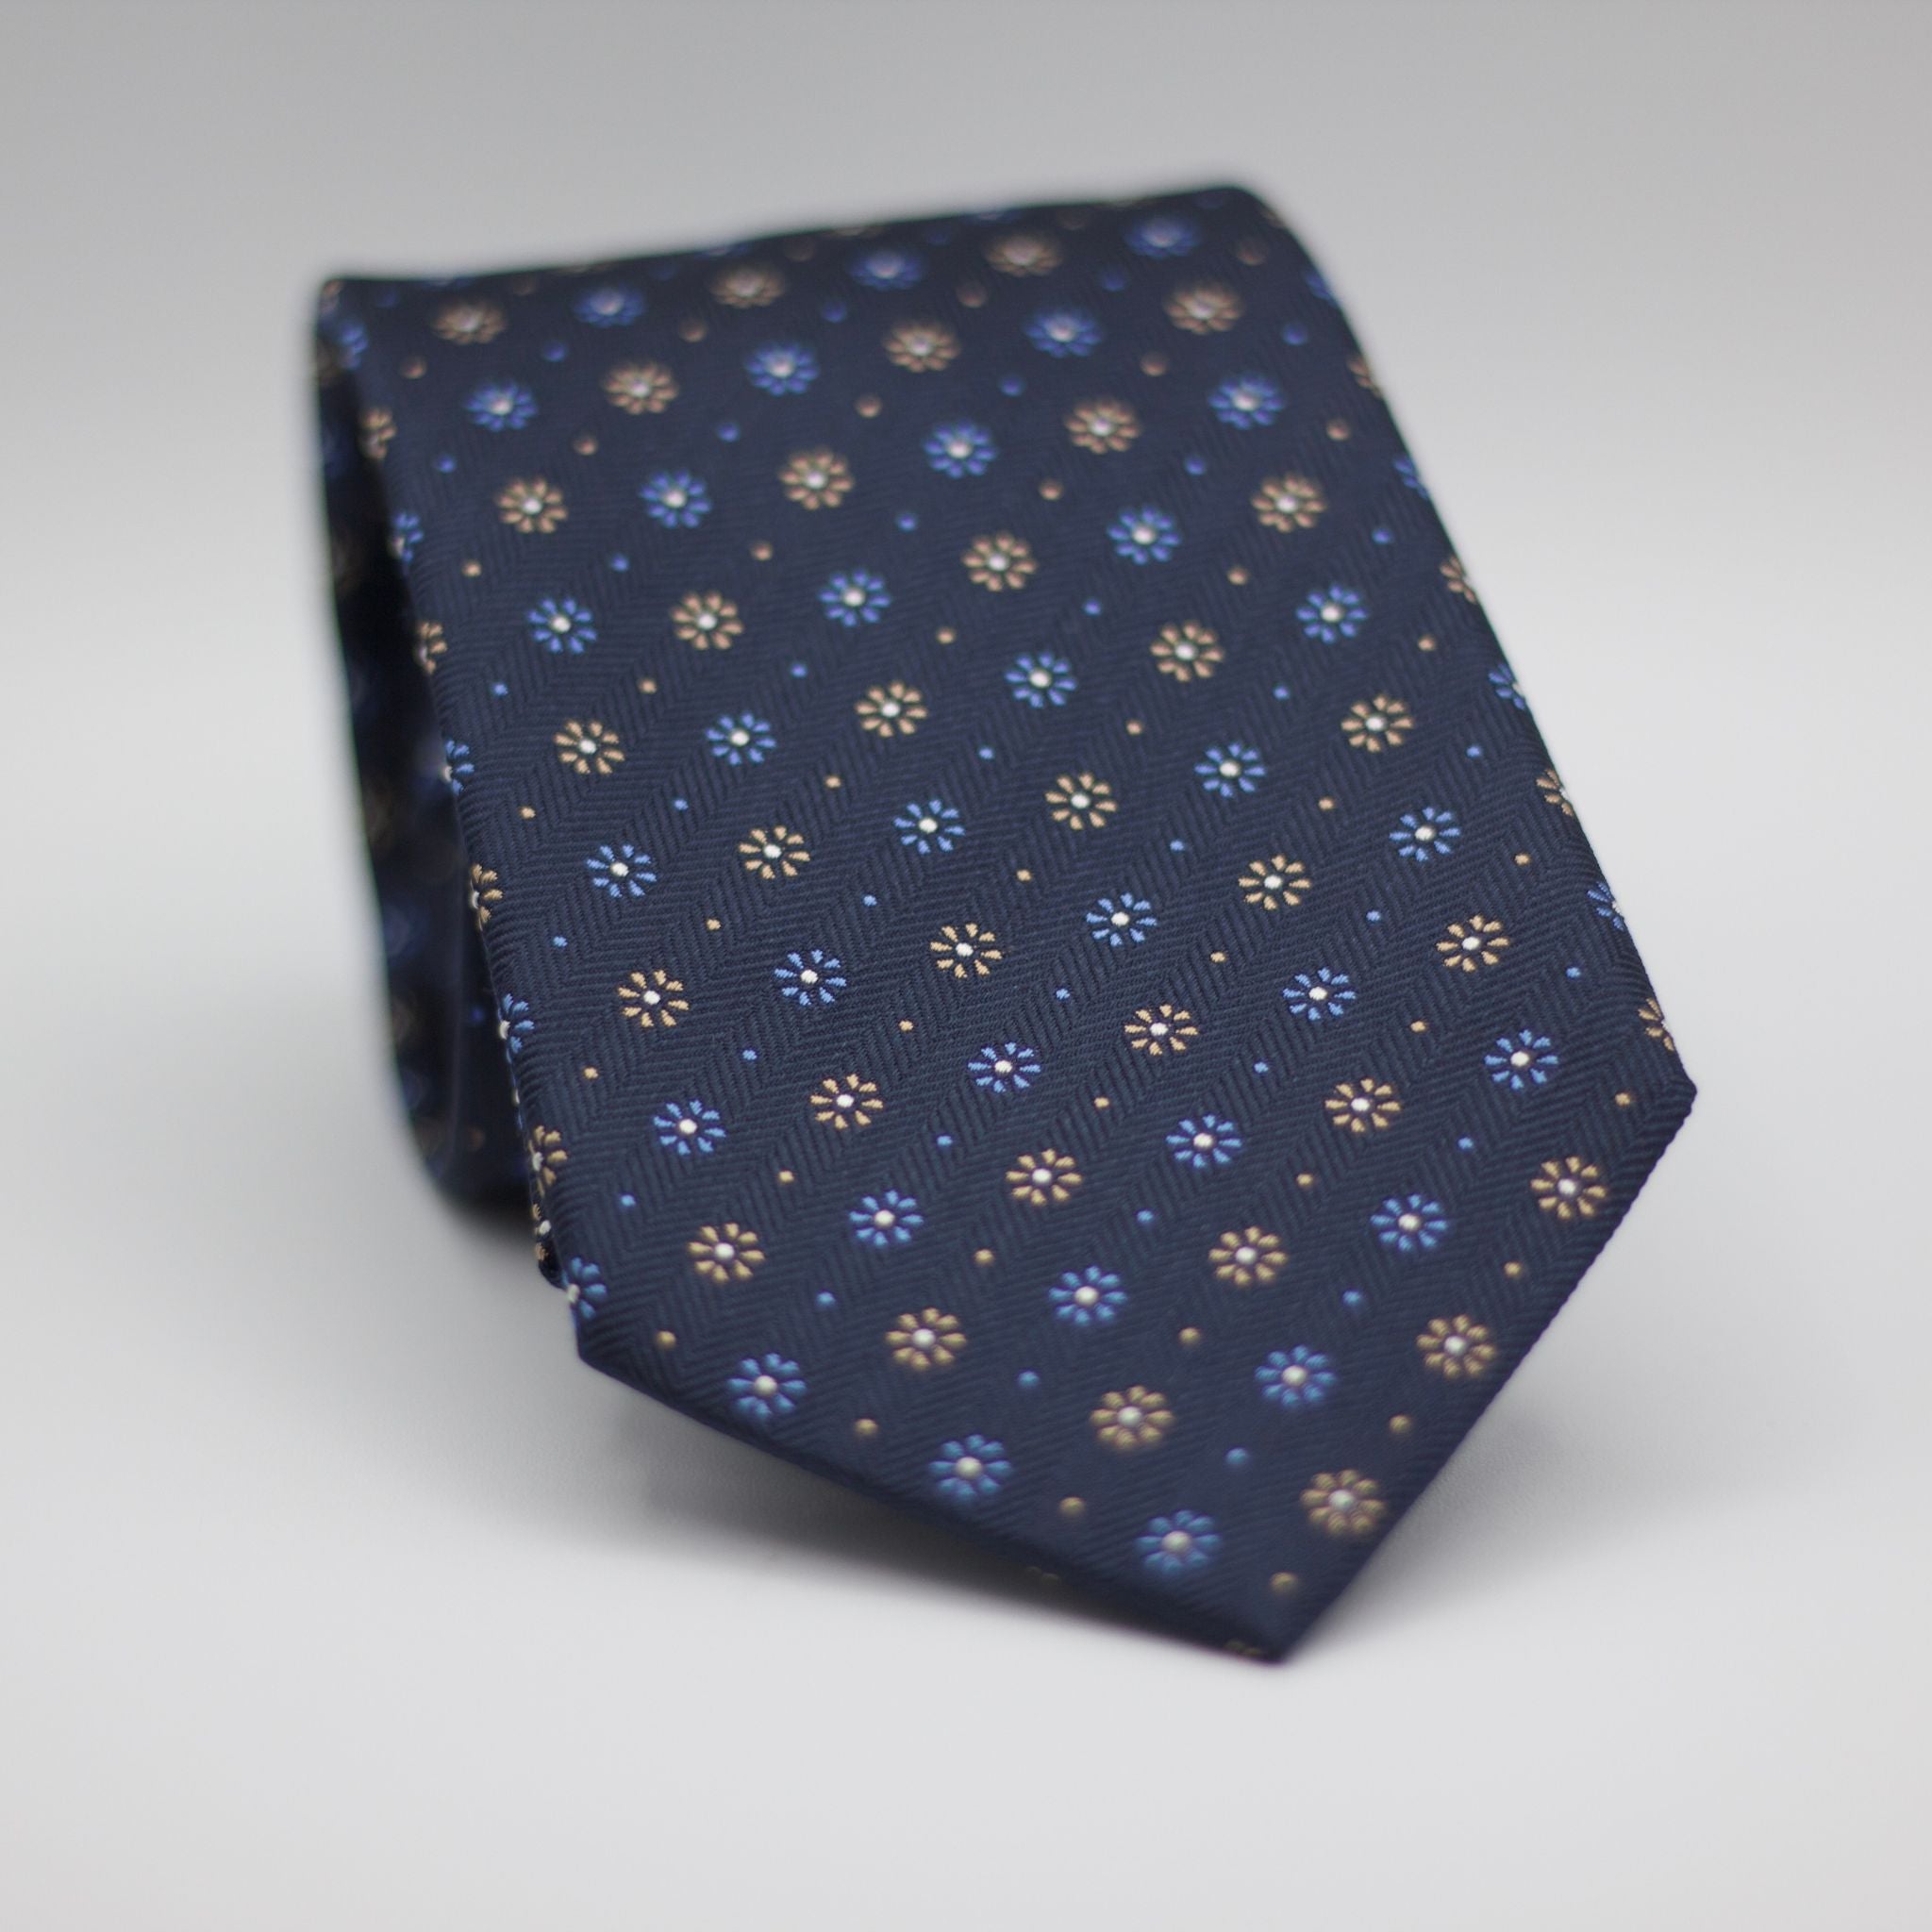 Holliday & Brown for Cruciani & Bella 100% printed Silk Self tipped Blue with Brown and Light Blue floral motif tie Handmade in Italy 8 cm x 150 cm #5071